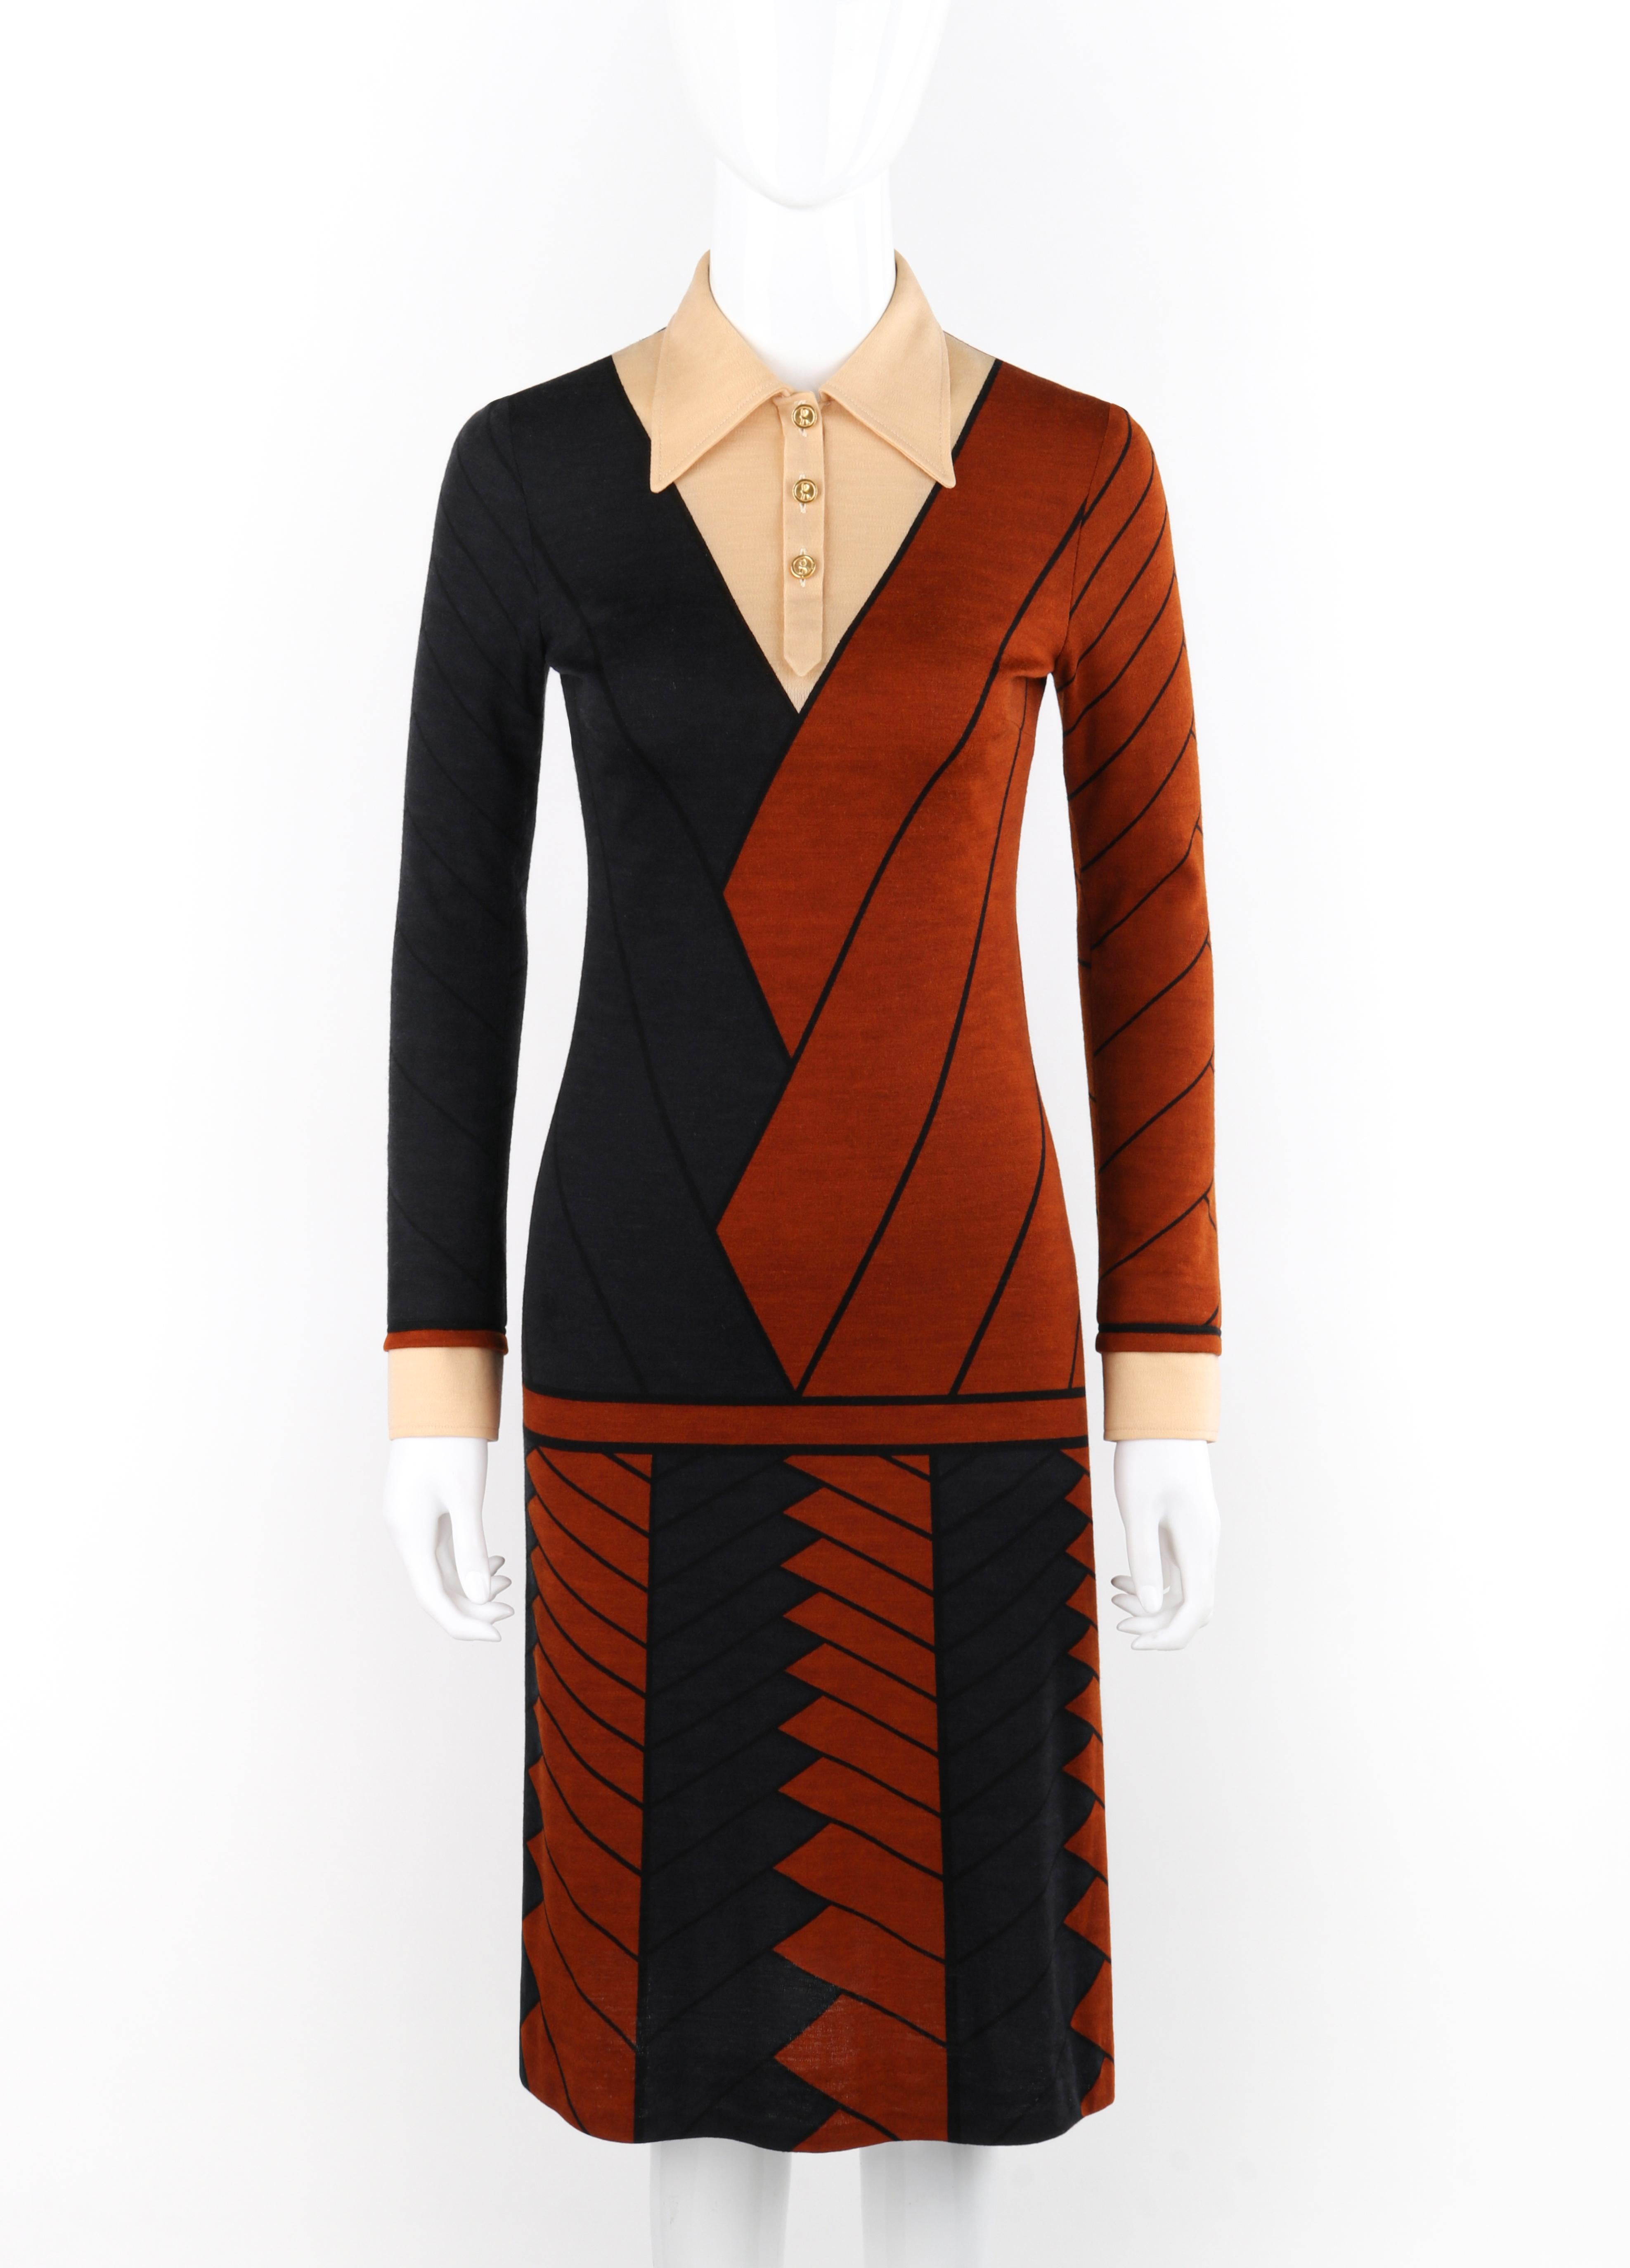 Brand / Manufacturer: Roberta Di Camerino
Circa: 1970s
Designer: Roberta Di Camerino
Style: Knee-length dress
Color(s): Shades of blue, brown, beige, gold
Lined: No
Marked Fabric Content: 